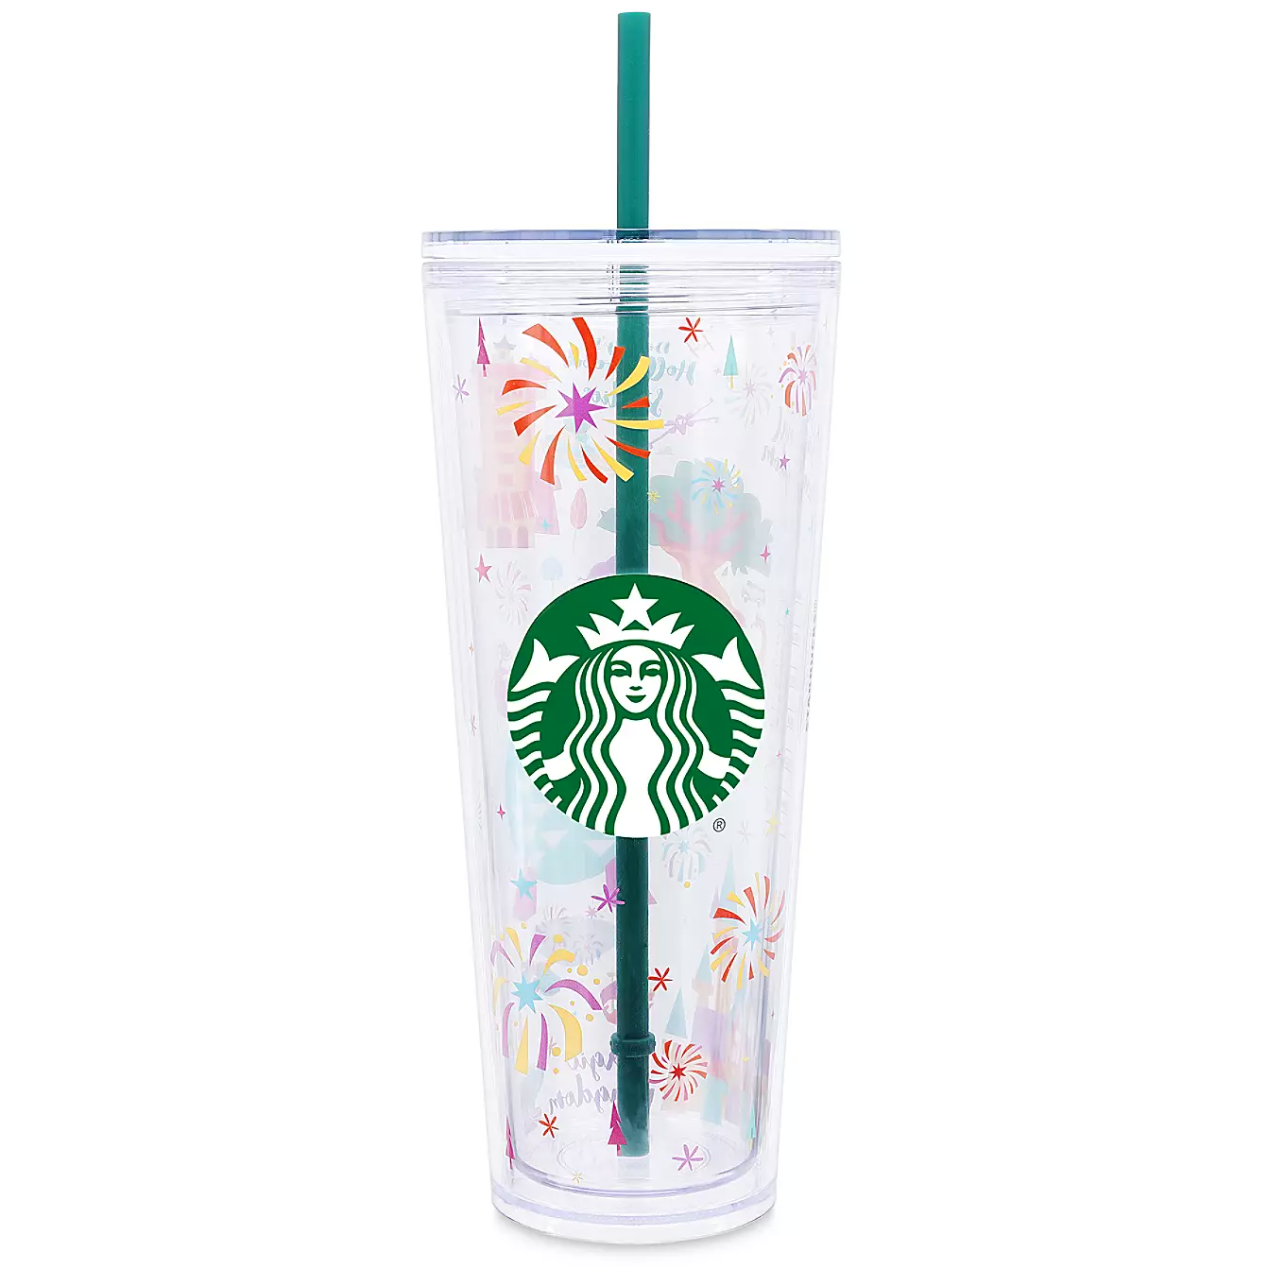 https://www.disneyfoodblog.com/wp-content/uploads/2021/01/Walt-Disney-World-Tumbler-with-Straw-by-Starbucks-%E2%80%93-LargeScreen-Shot-2021-01-18-at-9.16.48-AM-1.png